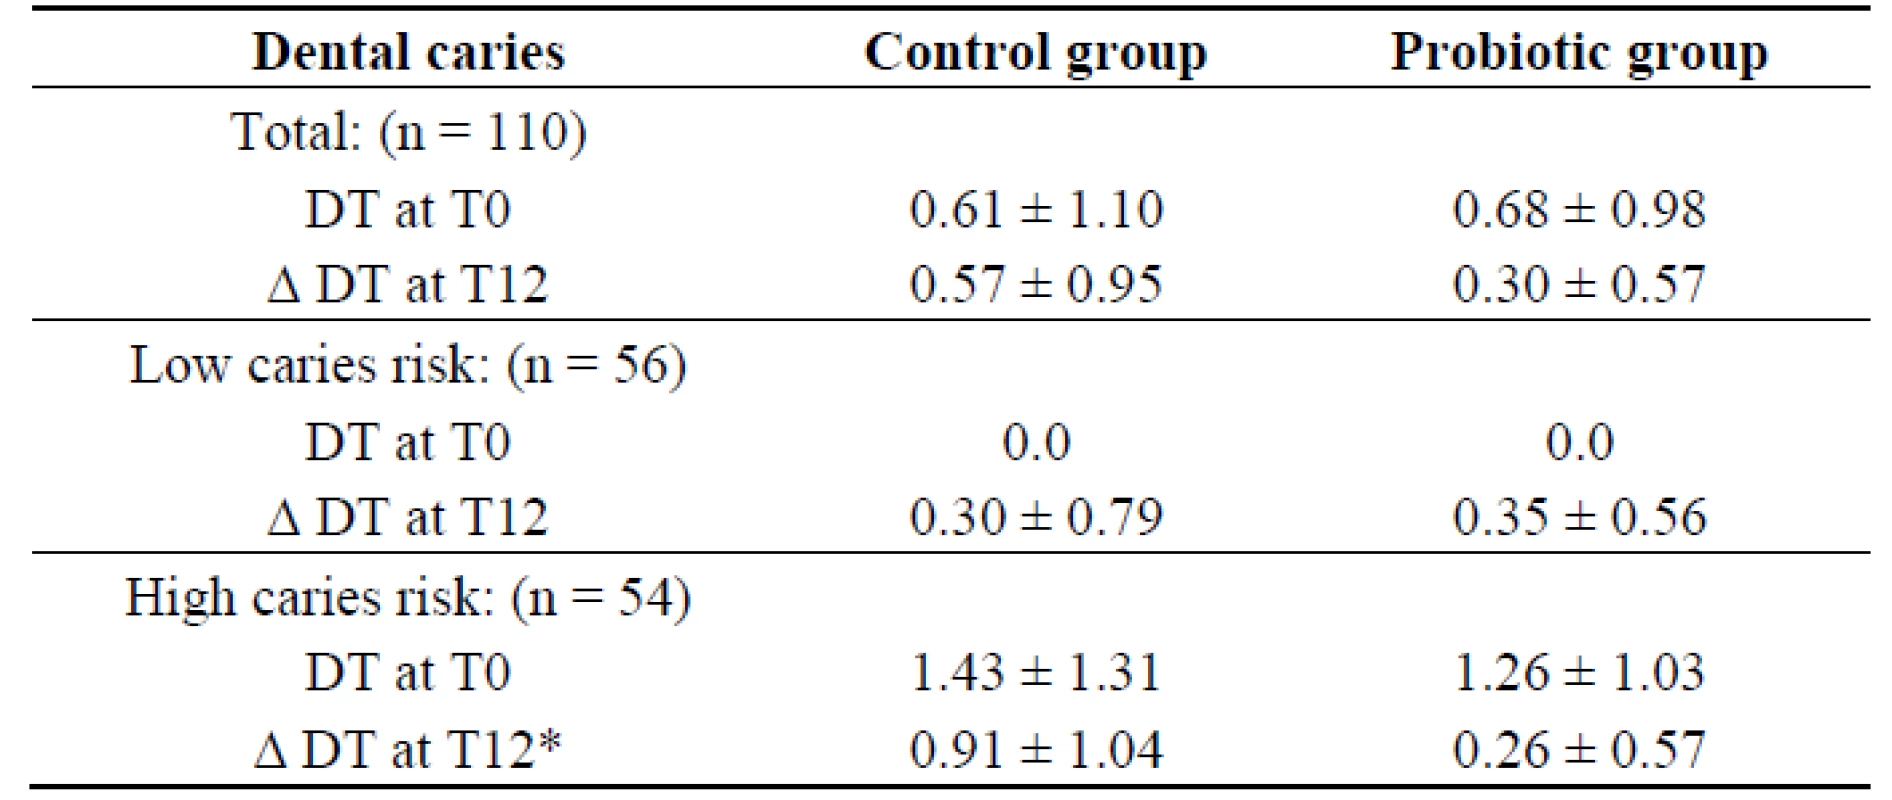 Mean decay teeth (DT) ± SD at T0 and mean caries increments (Δ DT) ± SD at T12 in the control and probiotic groups.